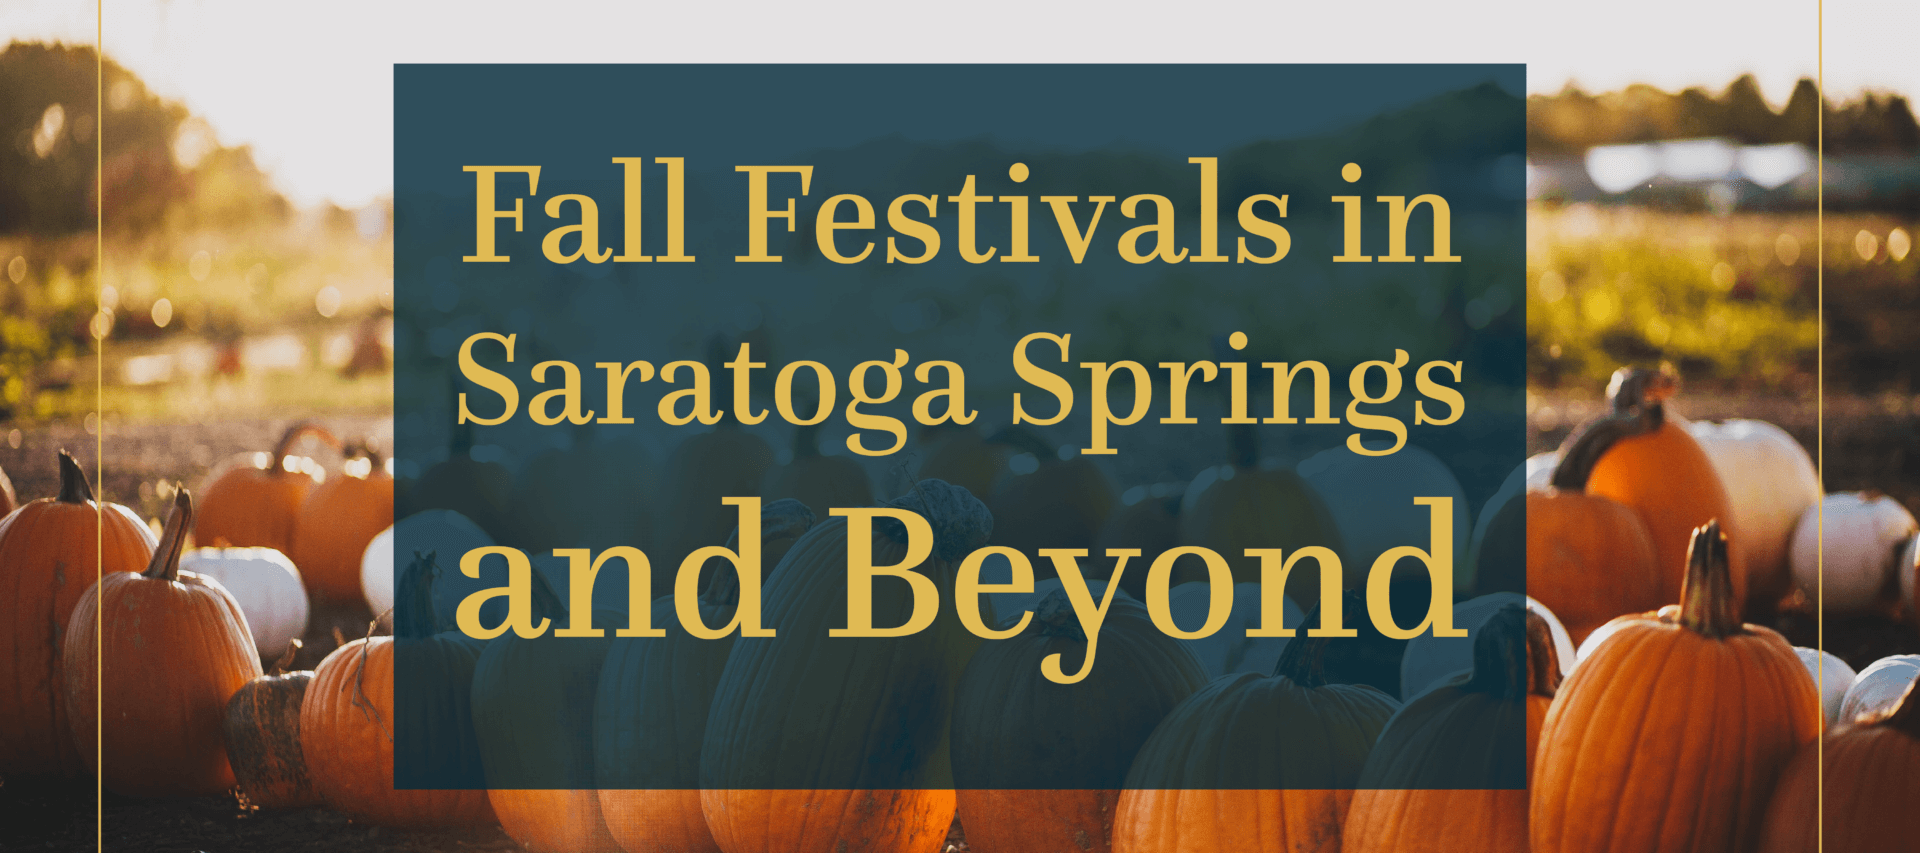 Fall Festivals in Saratoga Springs and Beyond